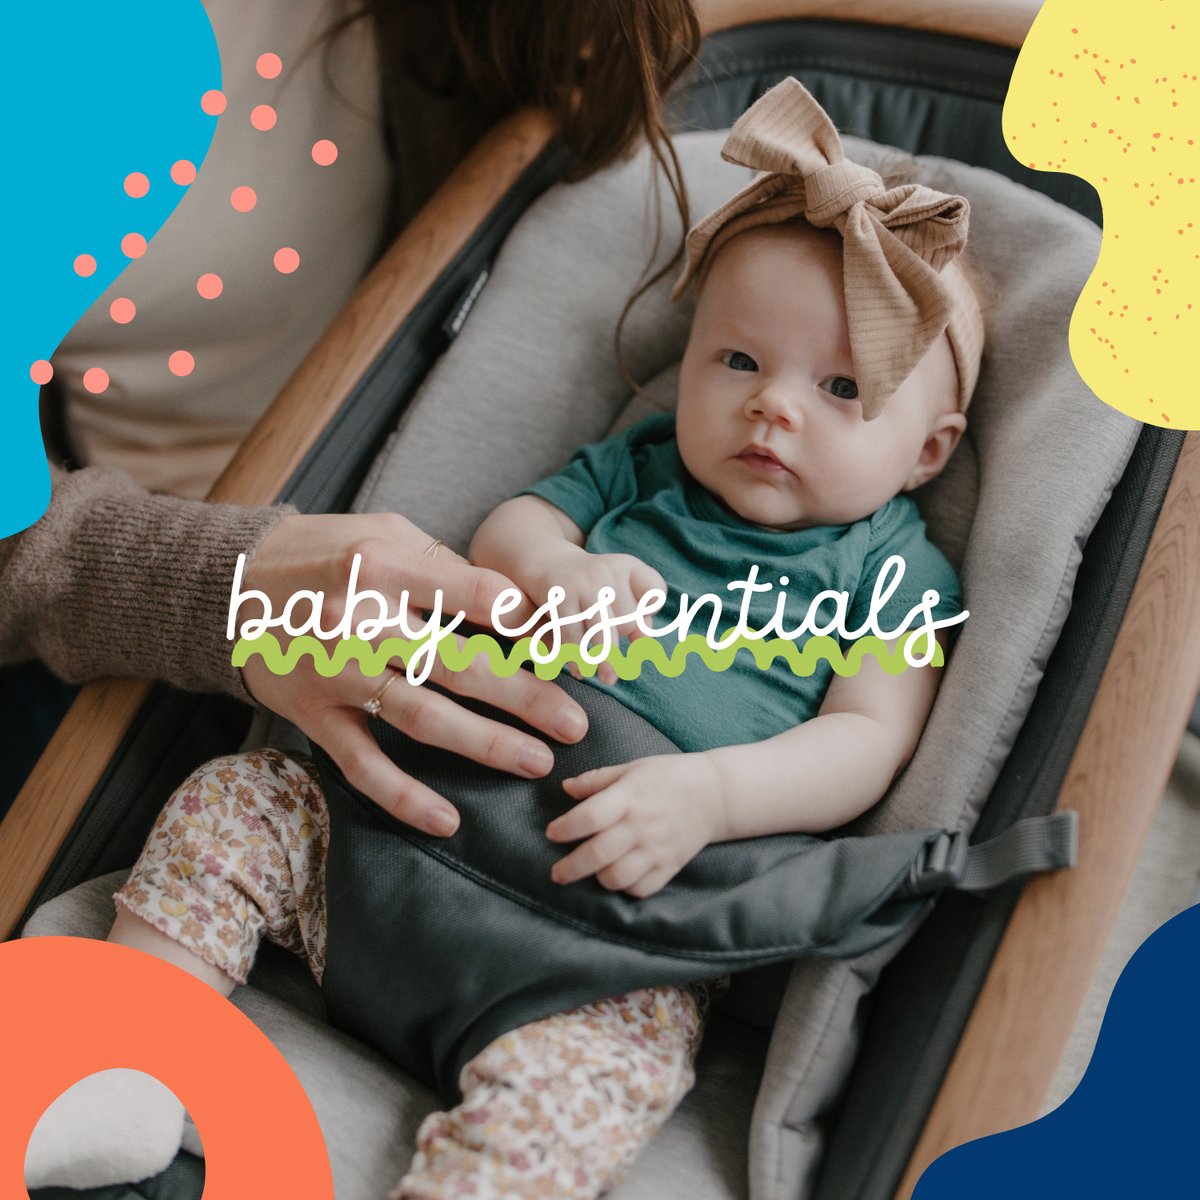 #OnceUponAChild is always buying #babyessentials! From clothing to footwear, strollers, bouncers, play centers and more - get paid when you sell us what your child has recently outgrown.